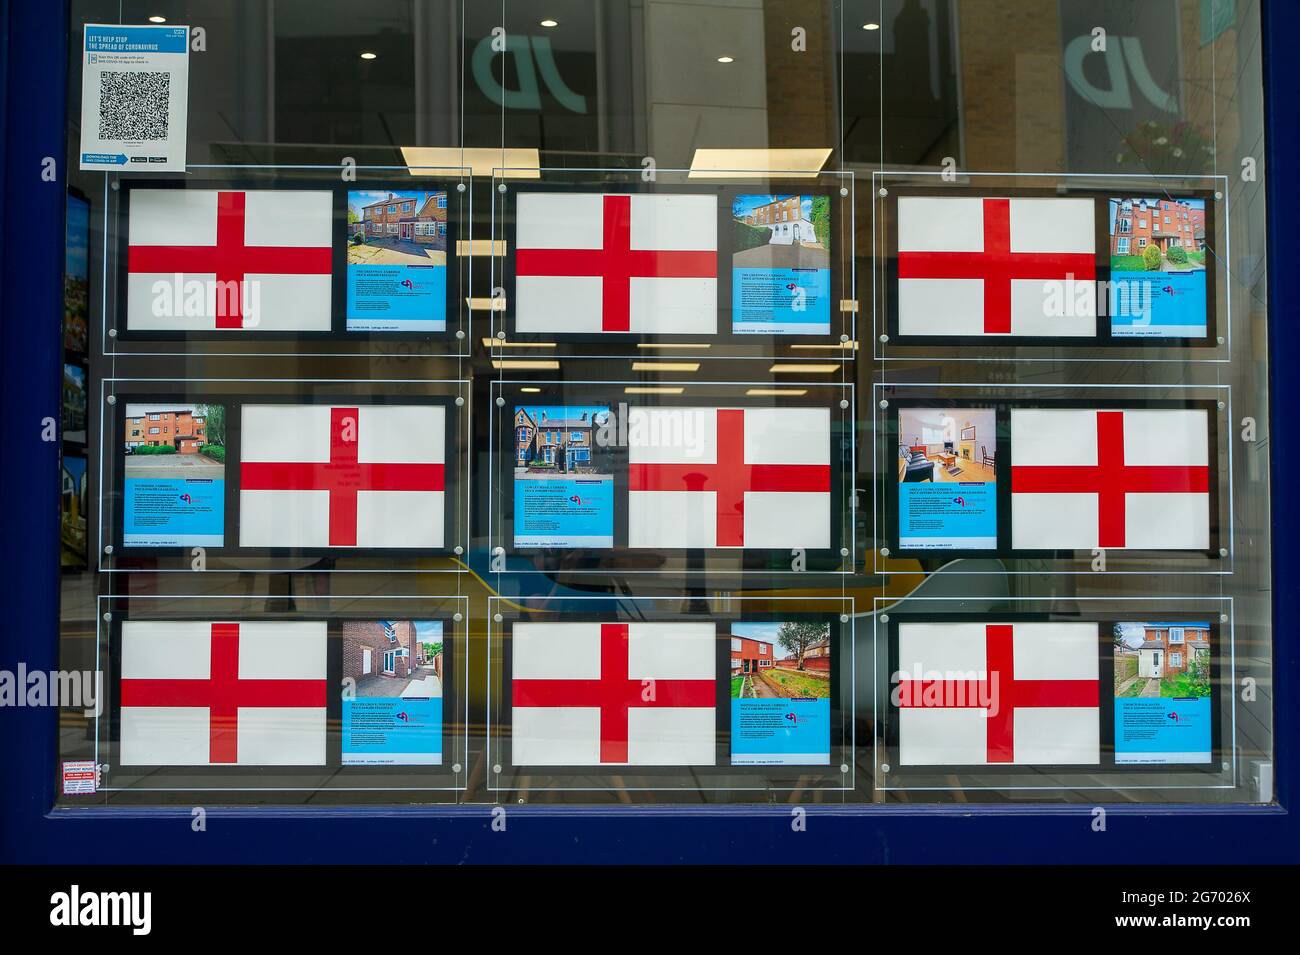 Uxbridge, London Borough of Hillingdon, UK. 9th July, 2021. England flags in an Estate Agents window ahead of the UEFA Euro 2020 final between England and Italy this Sunday. Credit: Maureen McLean/Alamy Live News Stock Photo